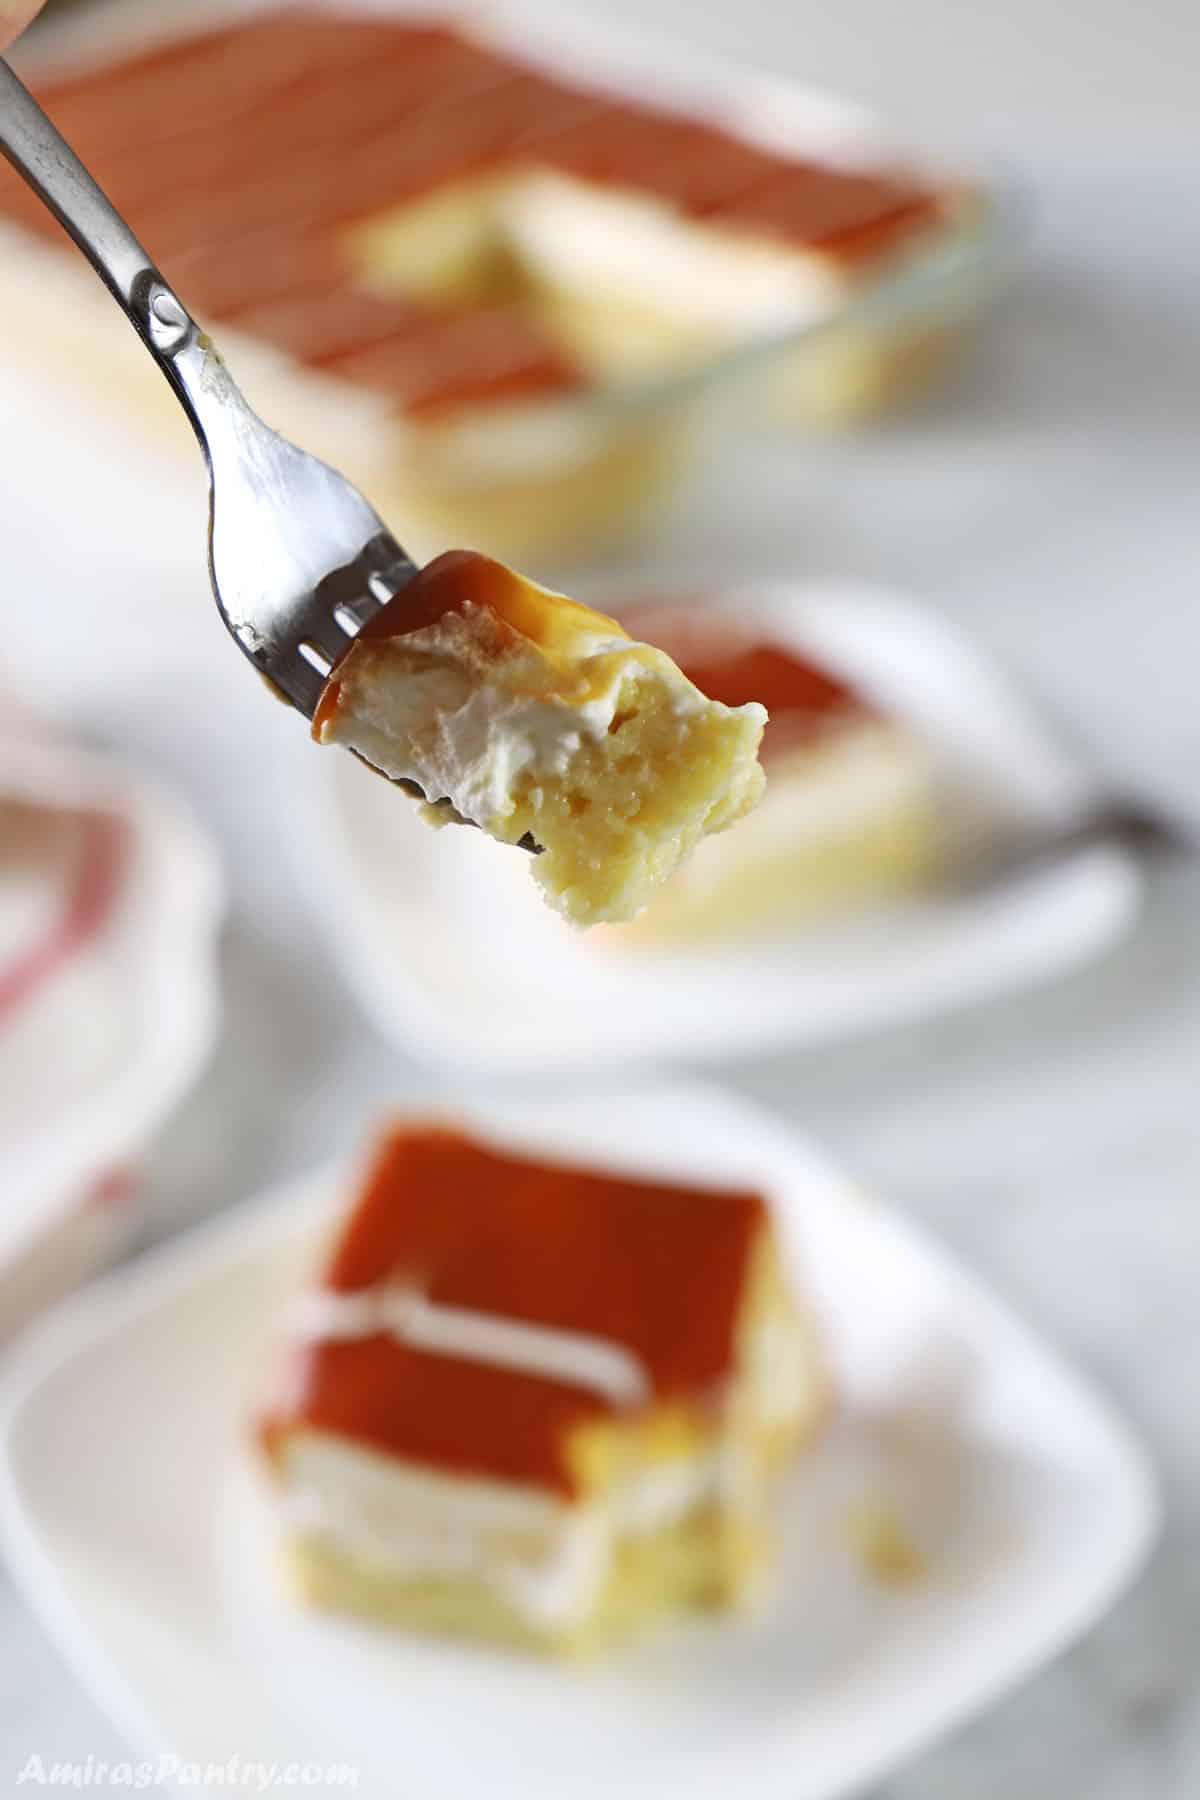 A fork holding a piece of the tres leches cake showing different layers and textures.